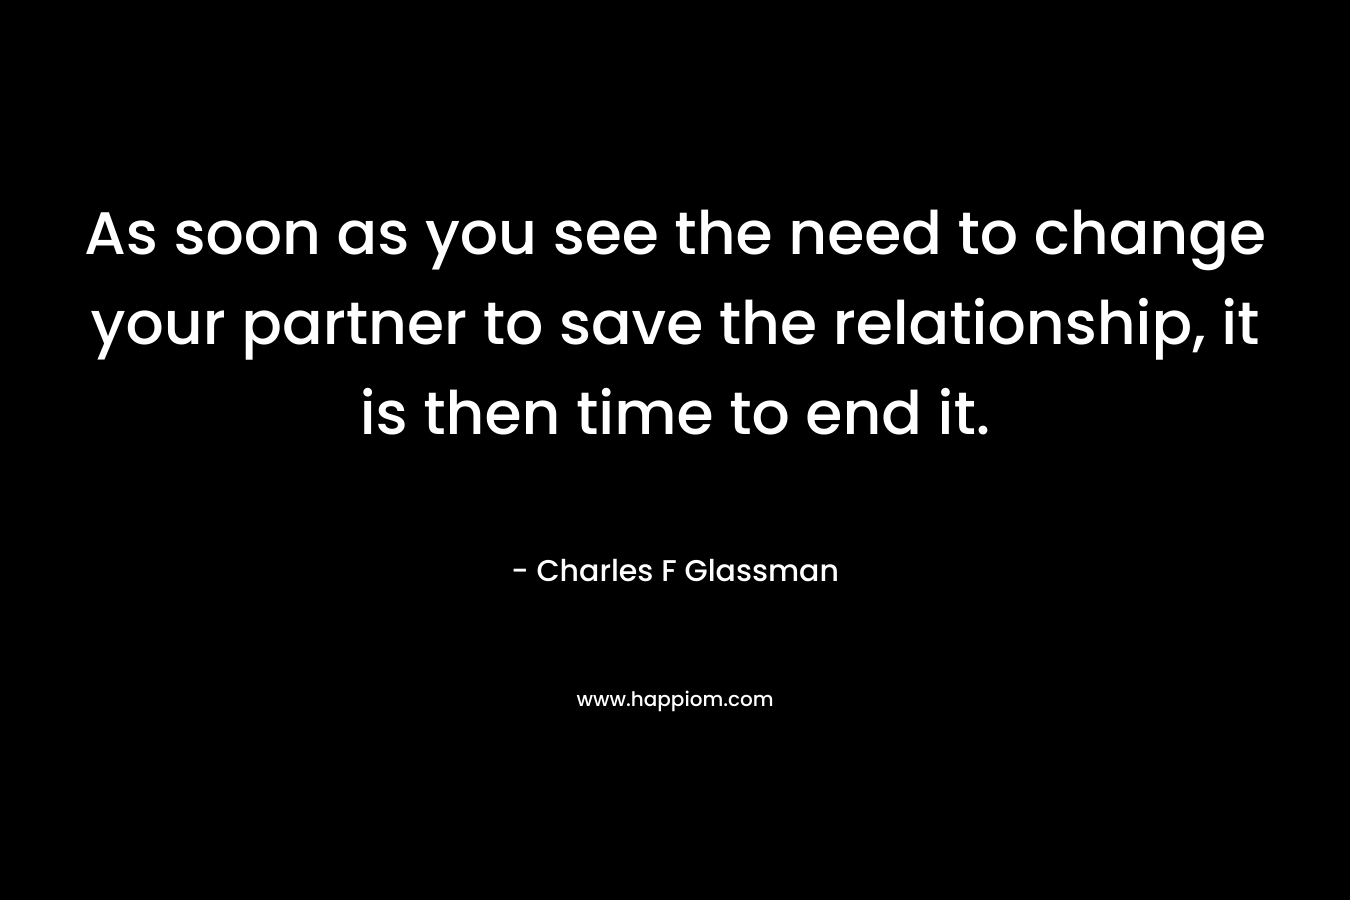 As soon as you see the need to change your partner to save the relationship, it is then time to end it.